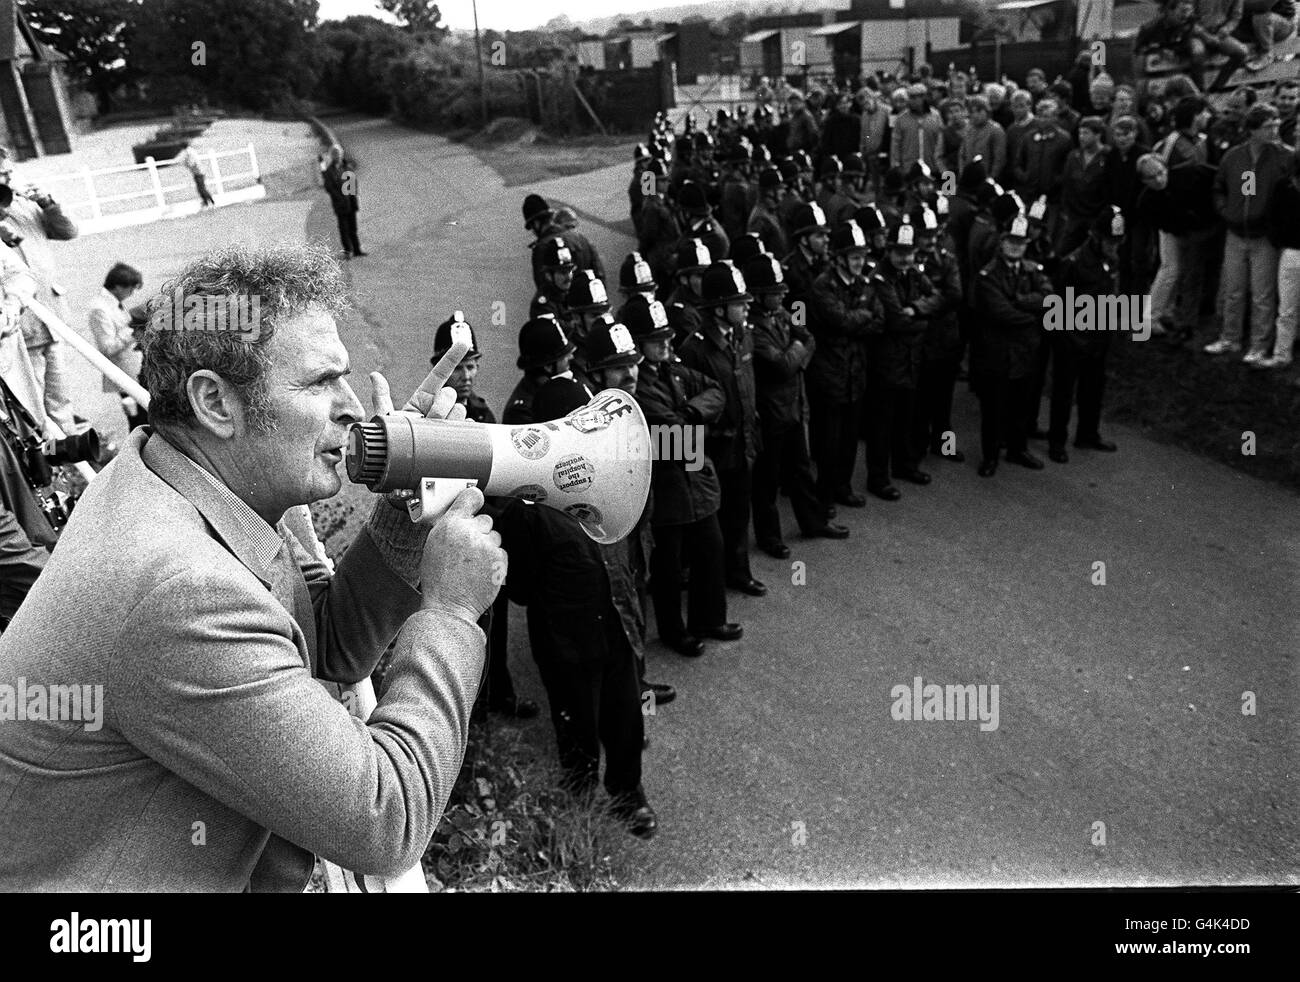 PA NEWS PHOTO 5/9/84 JACK COLLINS, SECRETARY OF THE KENT NUM, USES A LOUD HAILER TO ADDRESS THE MINERS PICKET, WATCHED BY POLICE AT THE TILMANSTONE COLLIERY, NEAR DOVER, DURING THE YEAR LONG MINERS STRIKE. Stock Photo